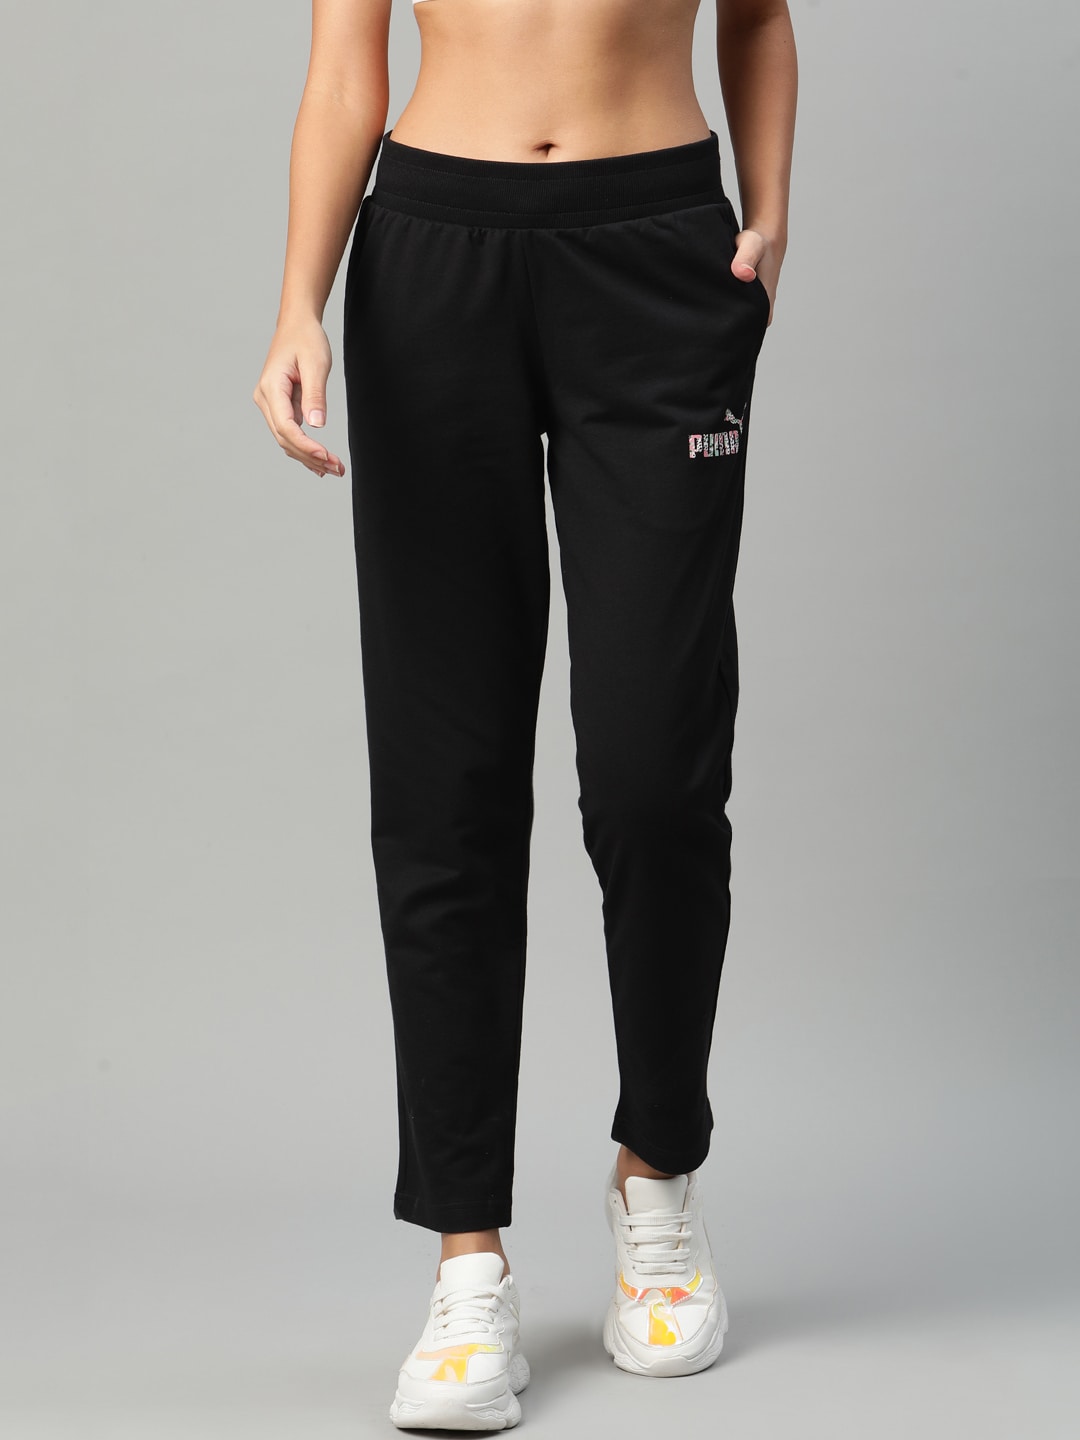 Puma Women Black Graphic 6 Solid Regular Fit Track Pants Price in India